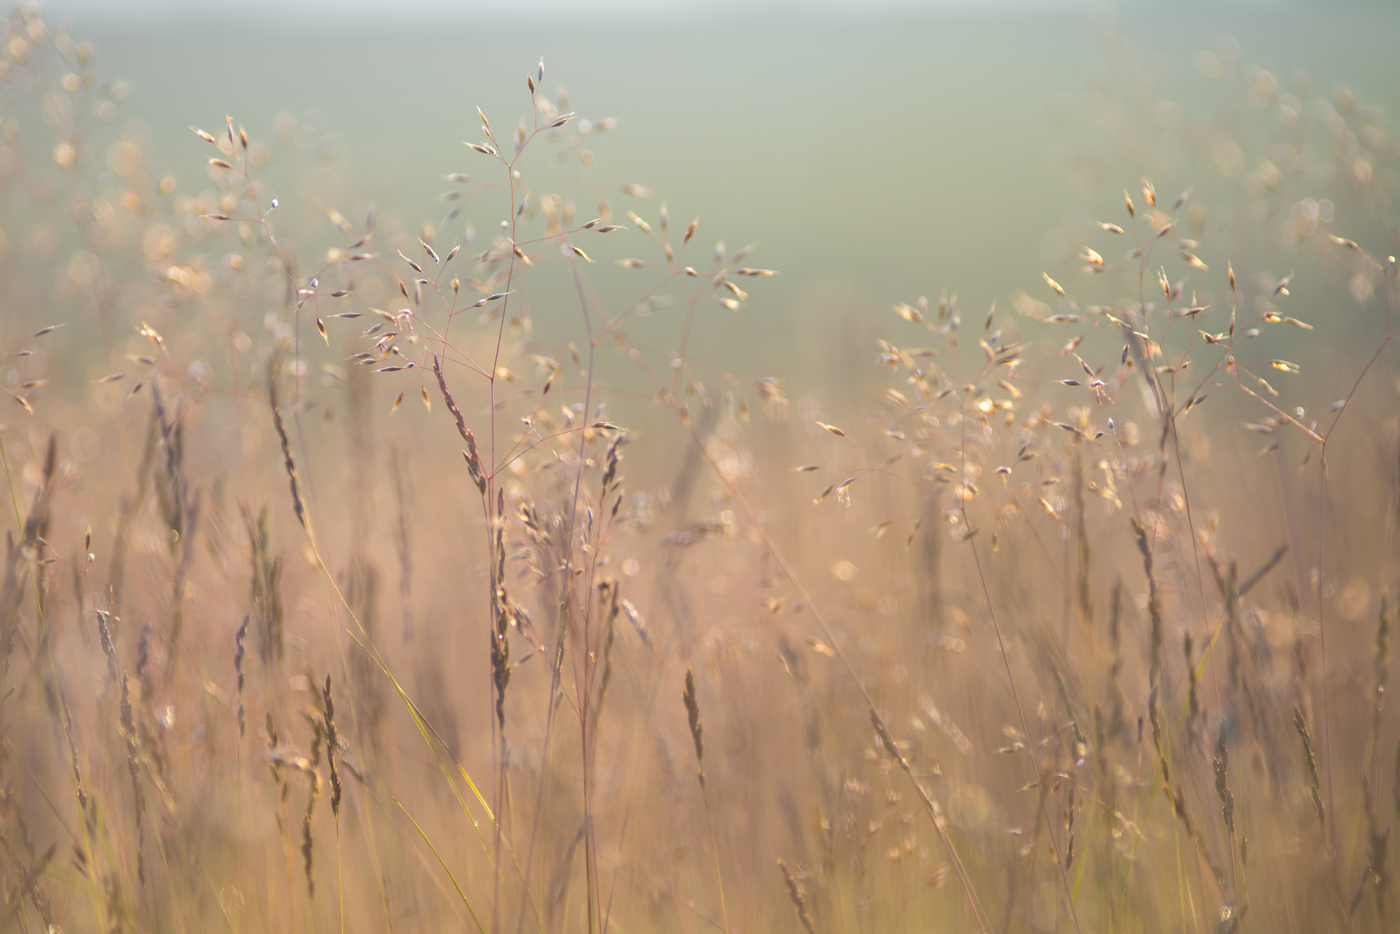 A close-up of golden wild grasses basking in soft, warm sunlight, casting a gentle glow and creating a tranquil scene typical of North Yorkshire's countryside. a sunset in the background